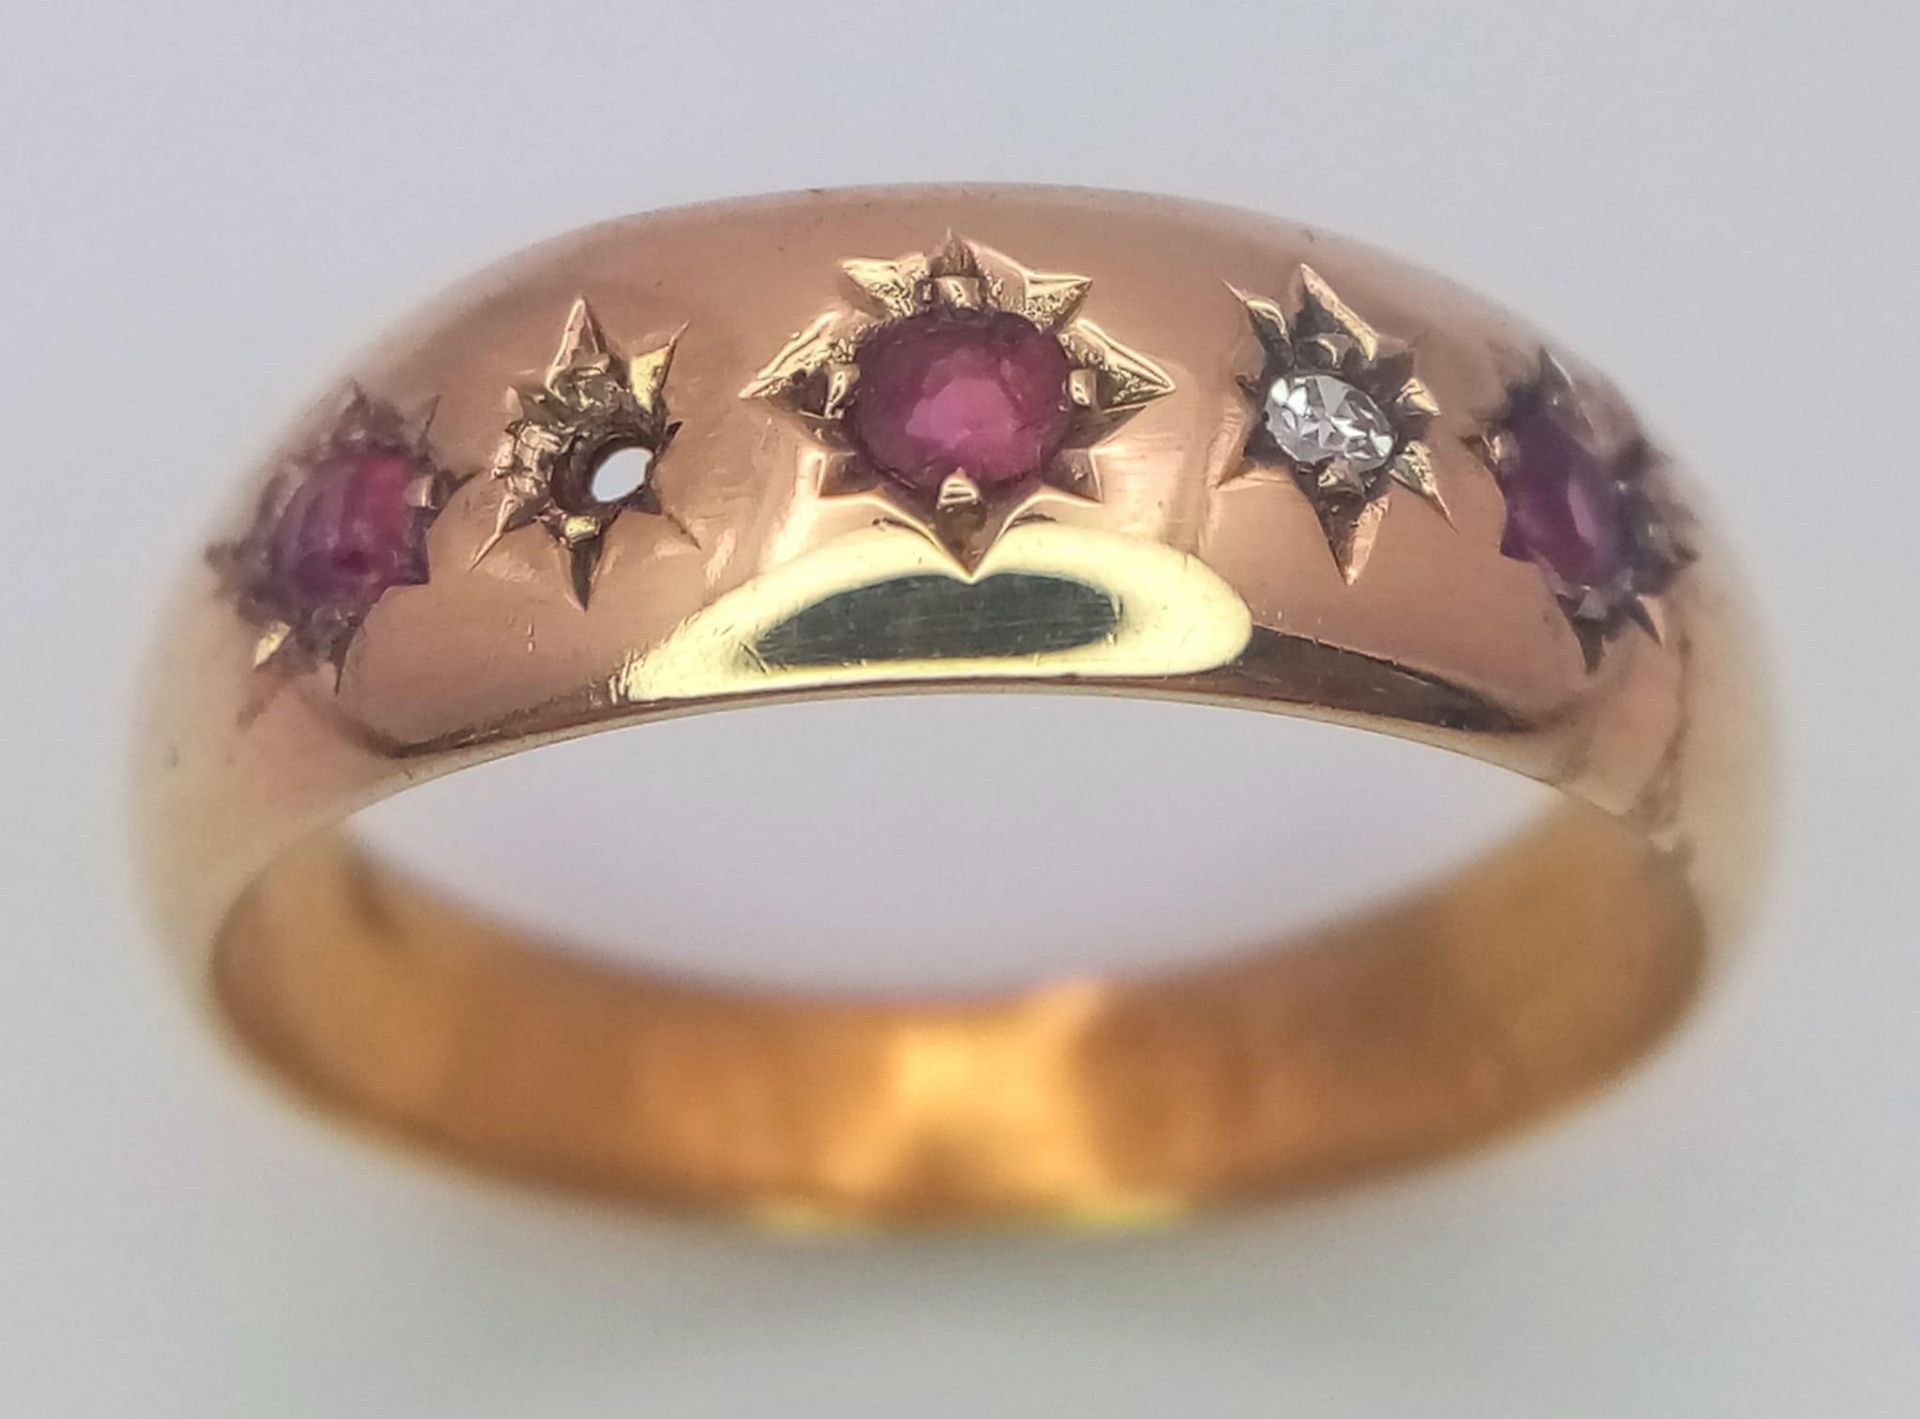 A VINTAGE 18K YELLOW GOLD DIAMOND & RUBY 5 STONE RING (one stone missing). 2.3G. SIZE N.